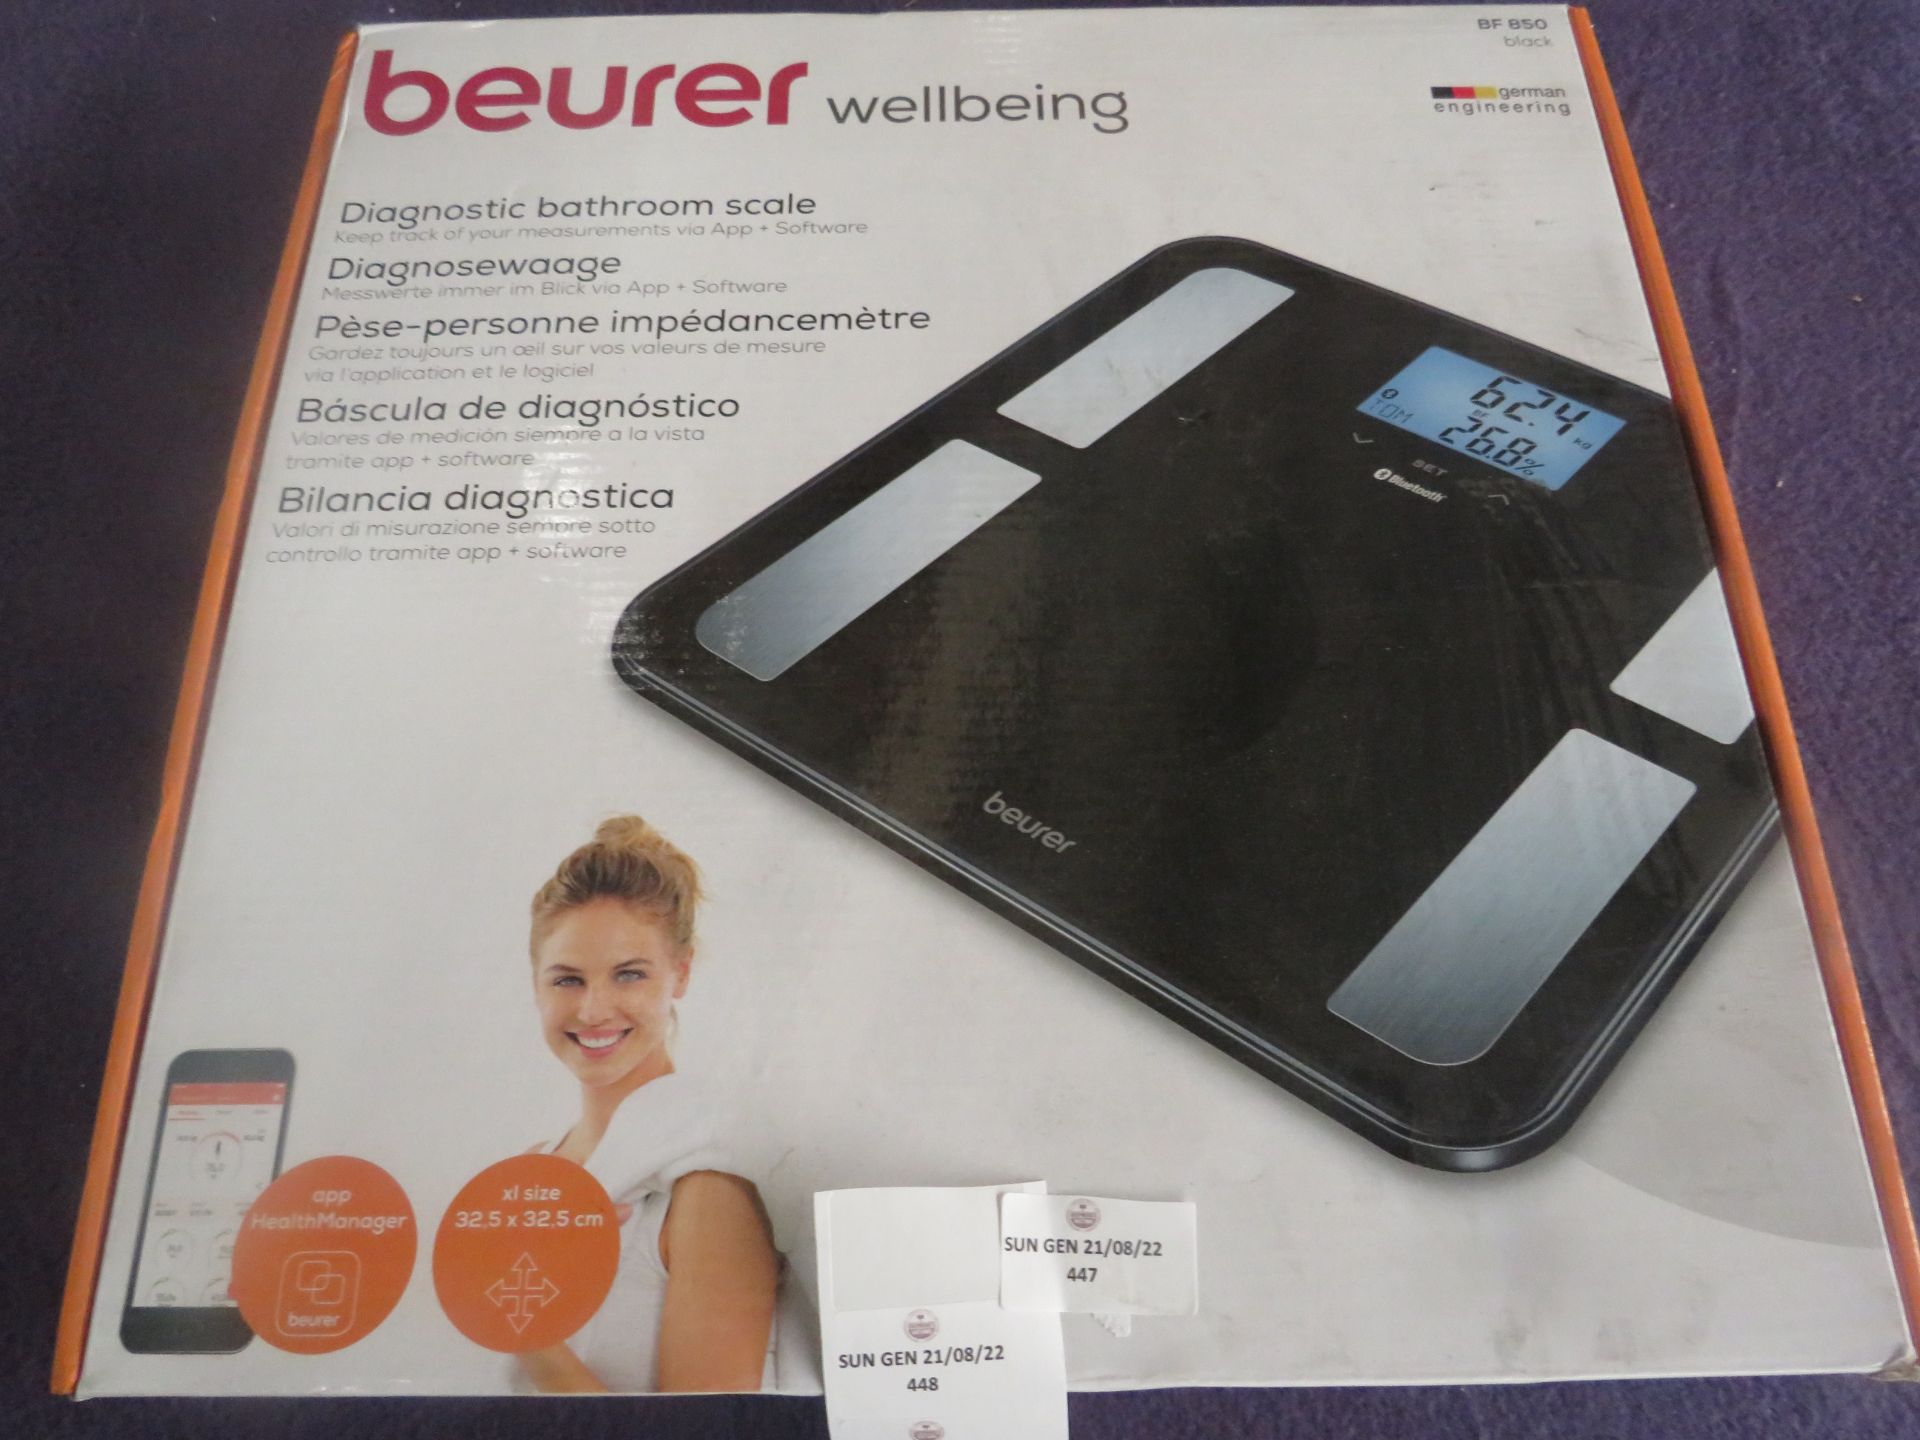 Beurer - Diagnostic Bathroom Scales - Black BF850 - Untested & Boxed.